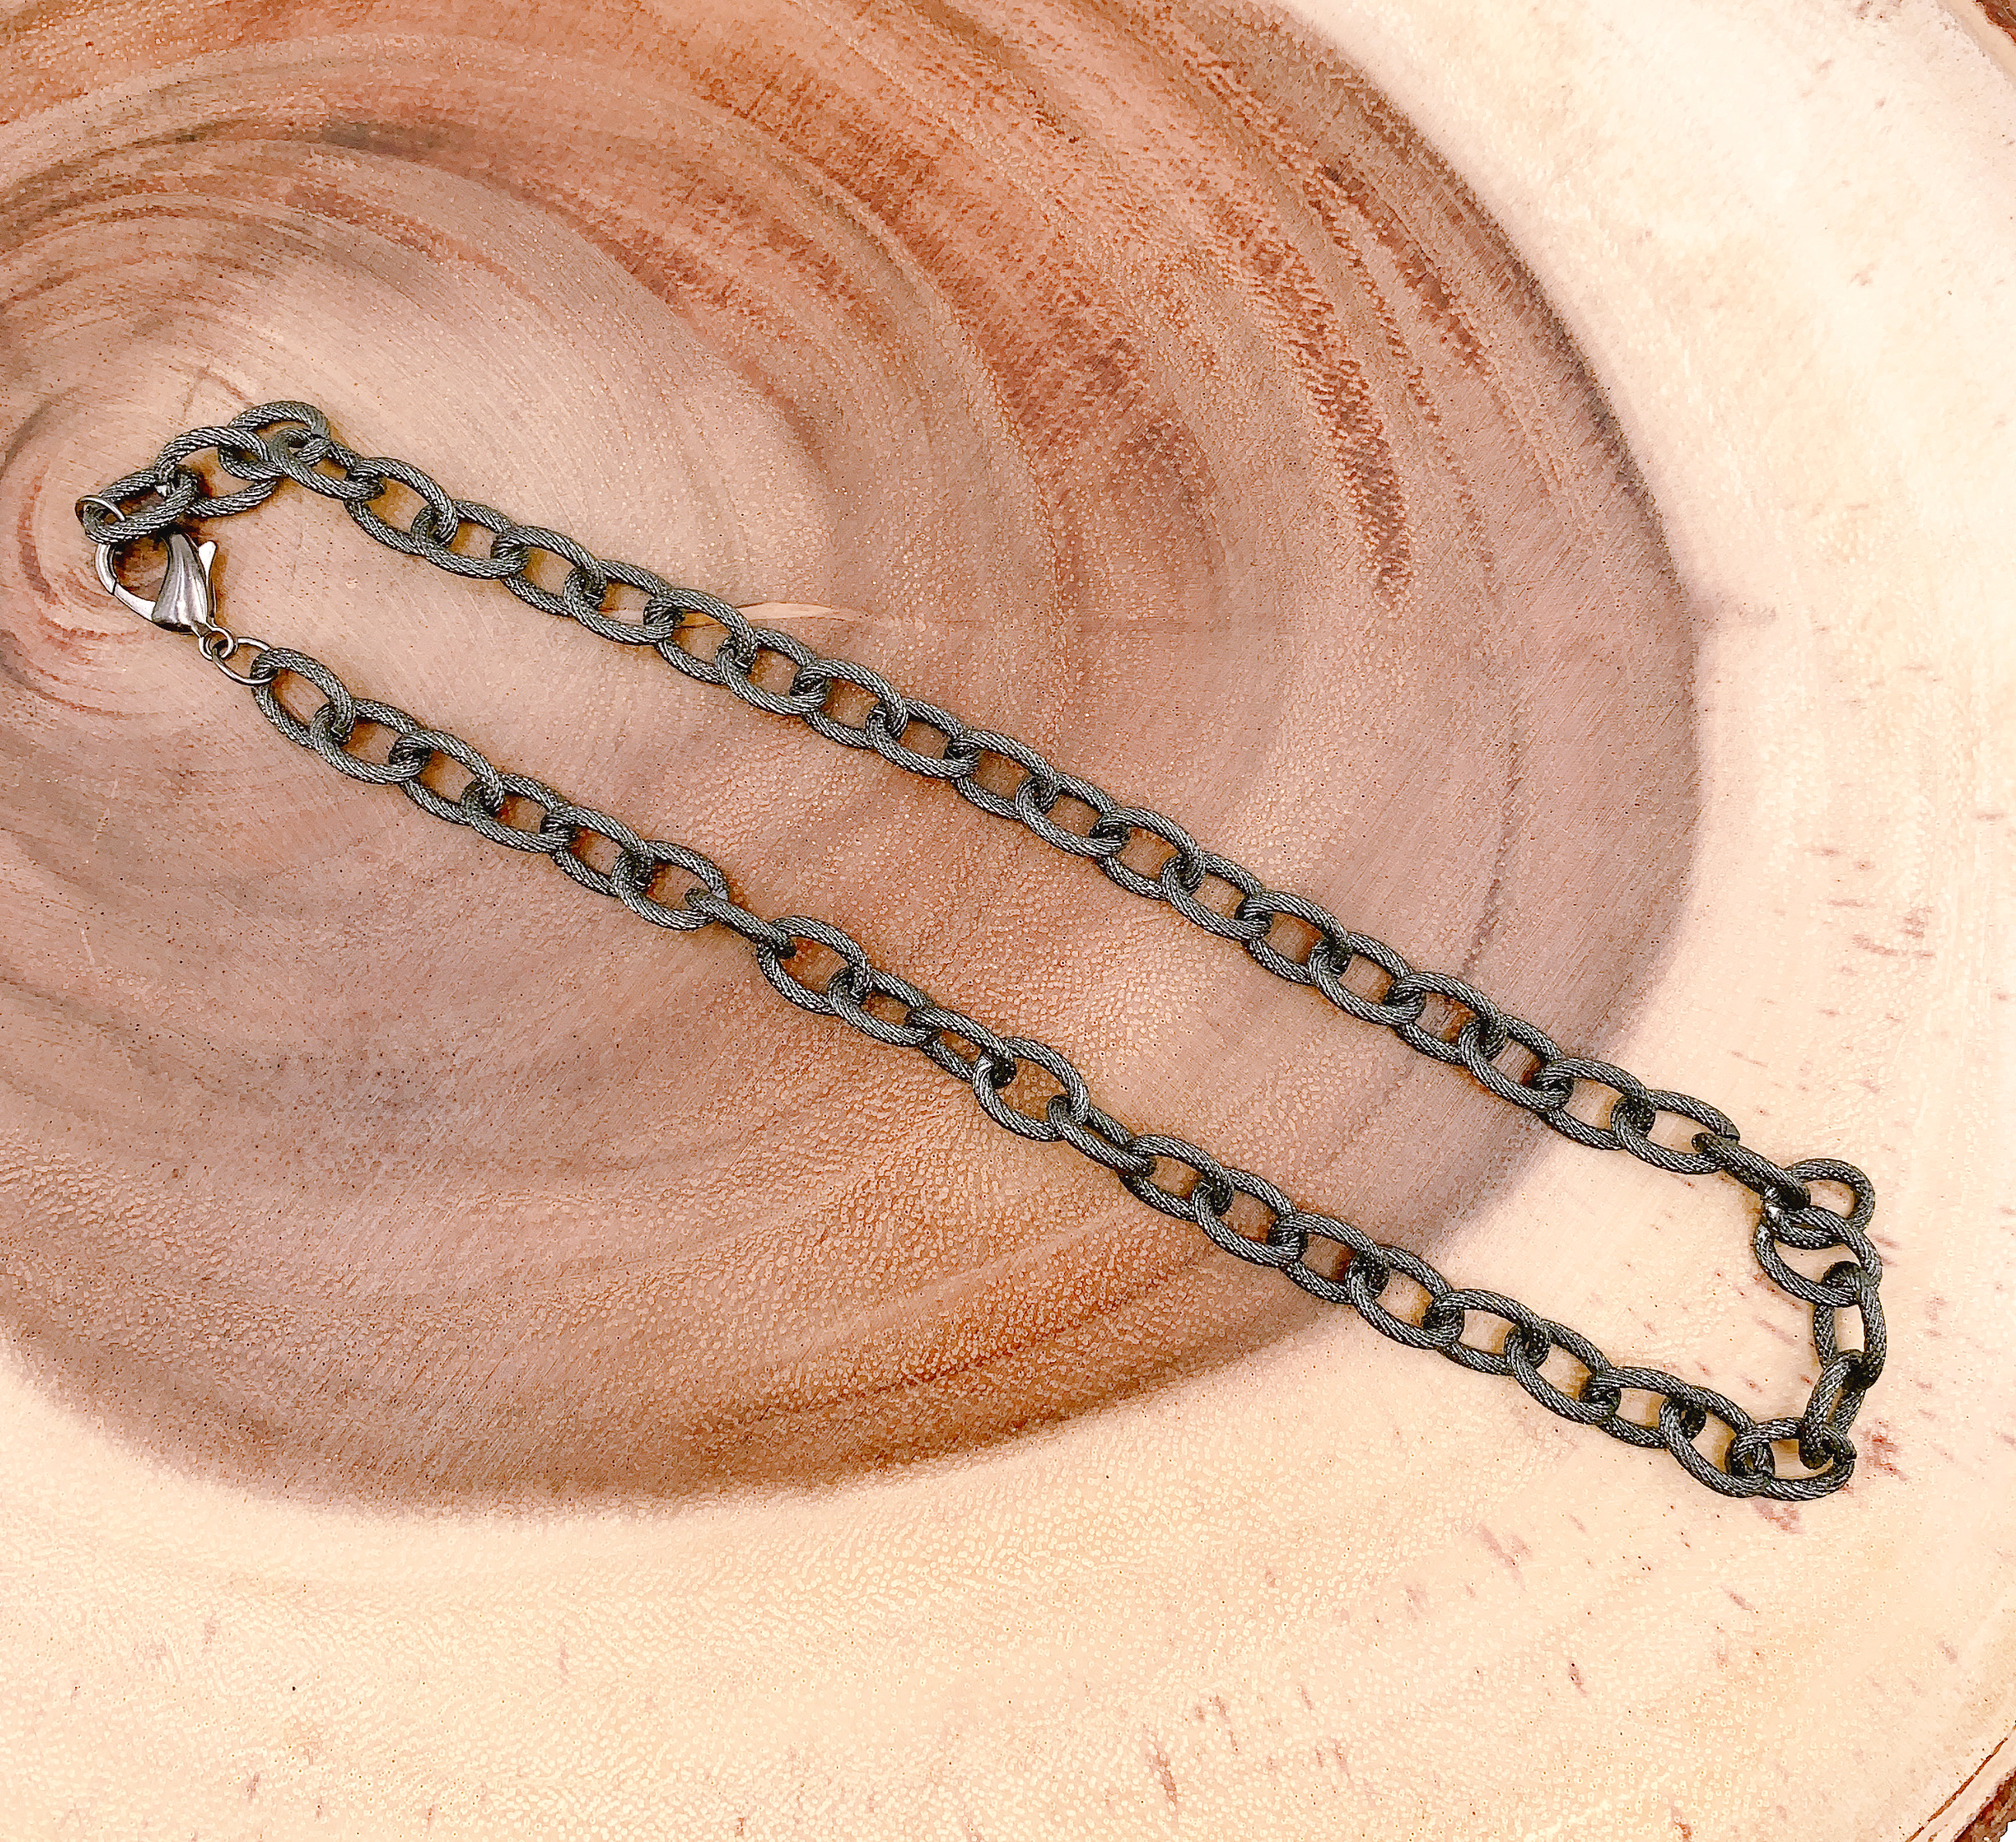 Black Rhodium Sterling Silver Finished Necklace Chain 10mm CH142 Available in 16 20 24 48